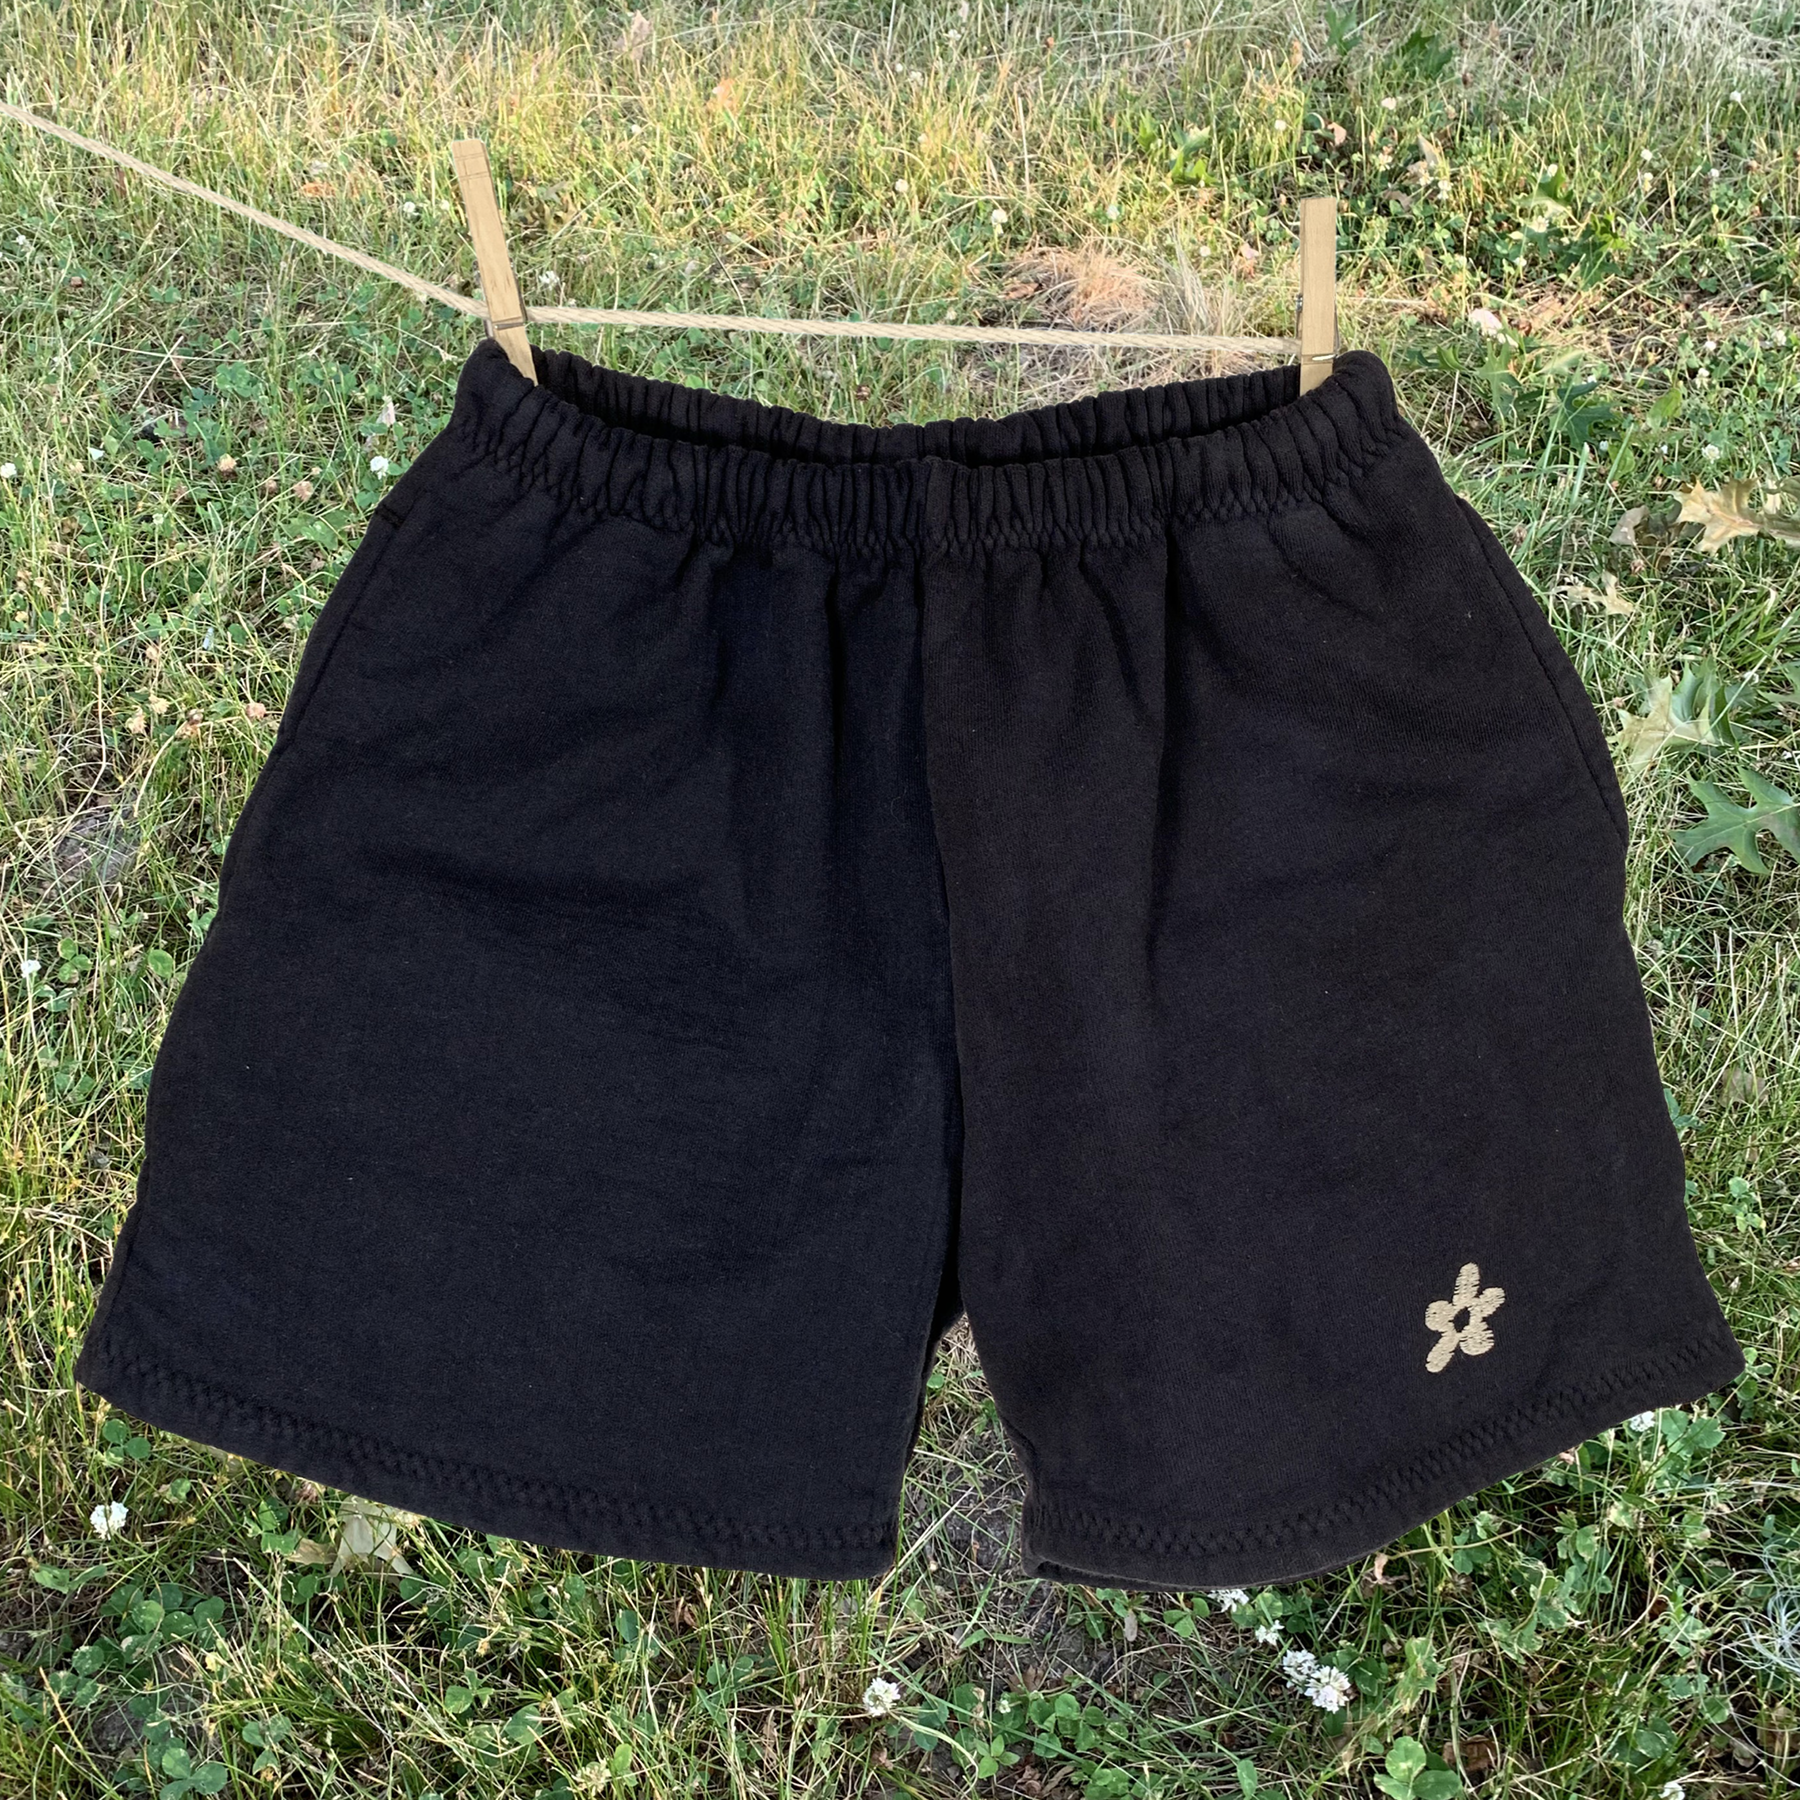 Home sewn embroidered shorts - S